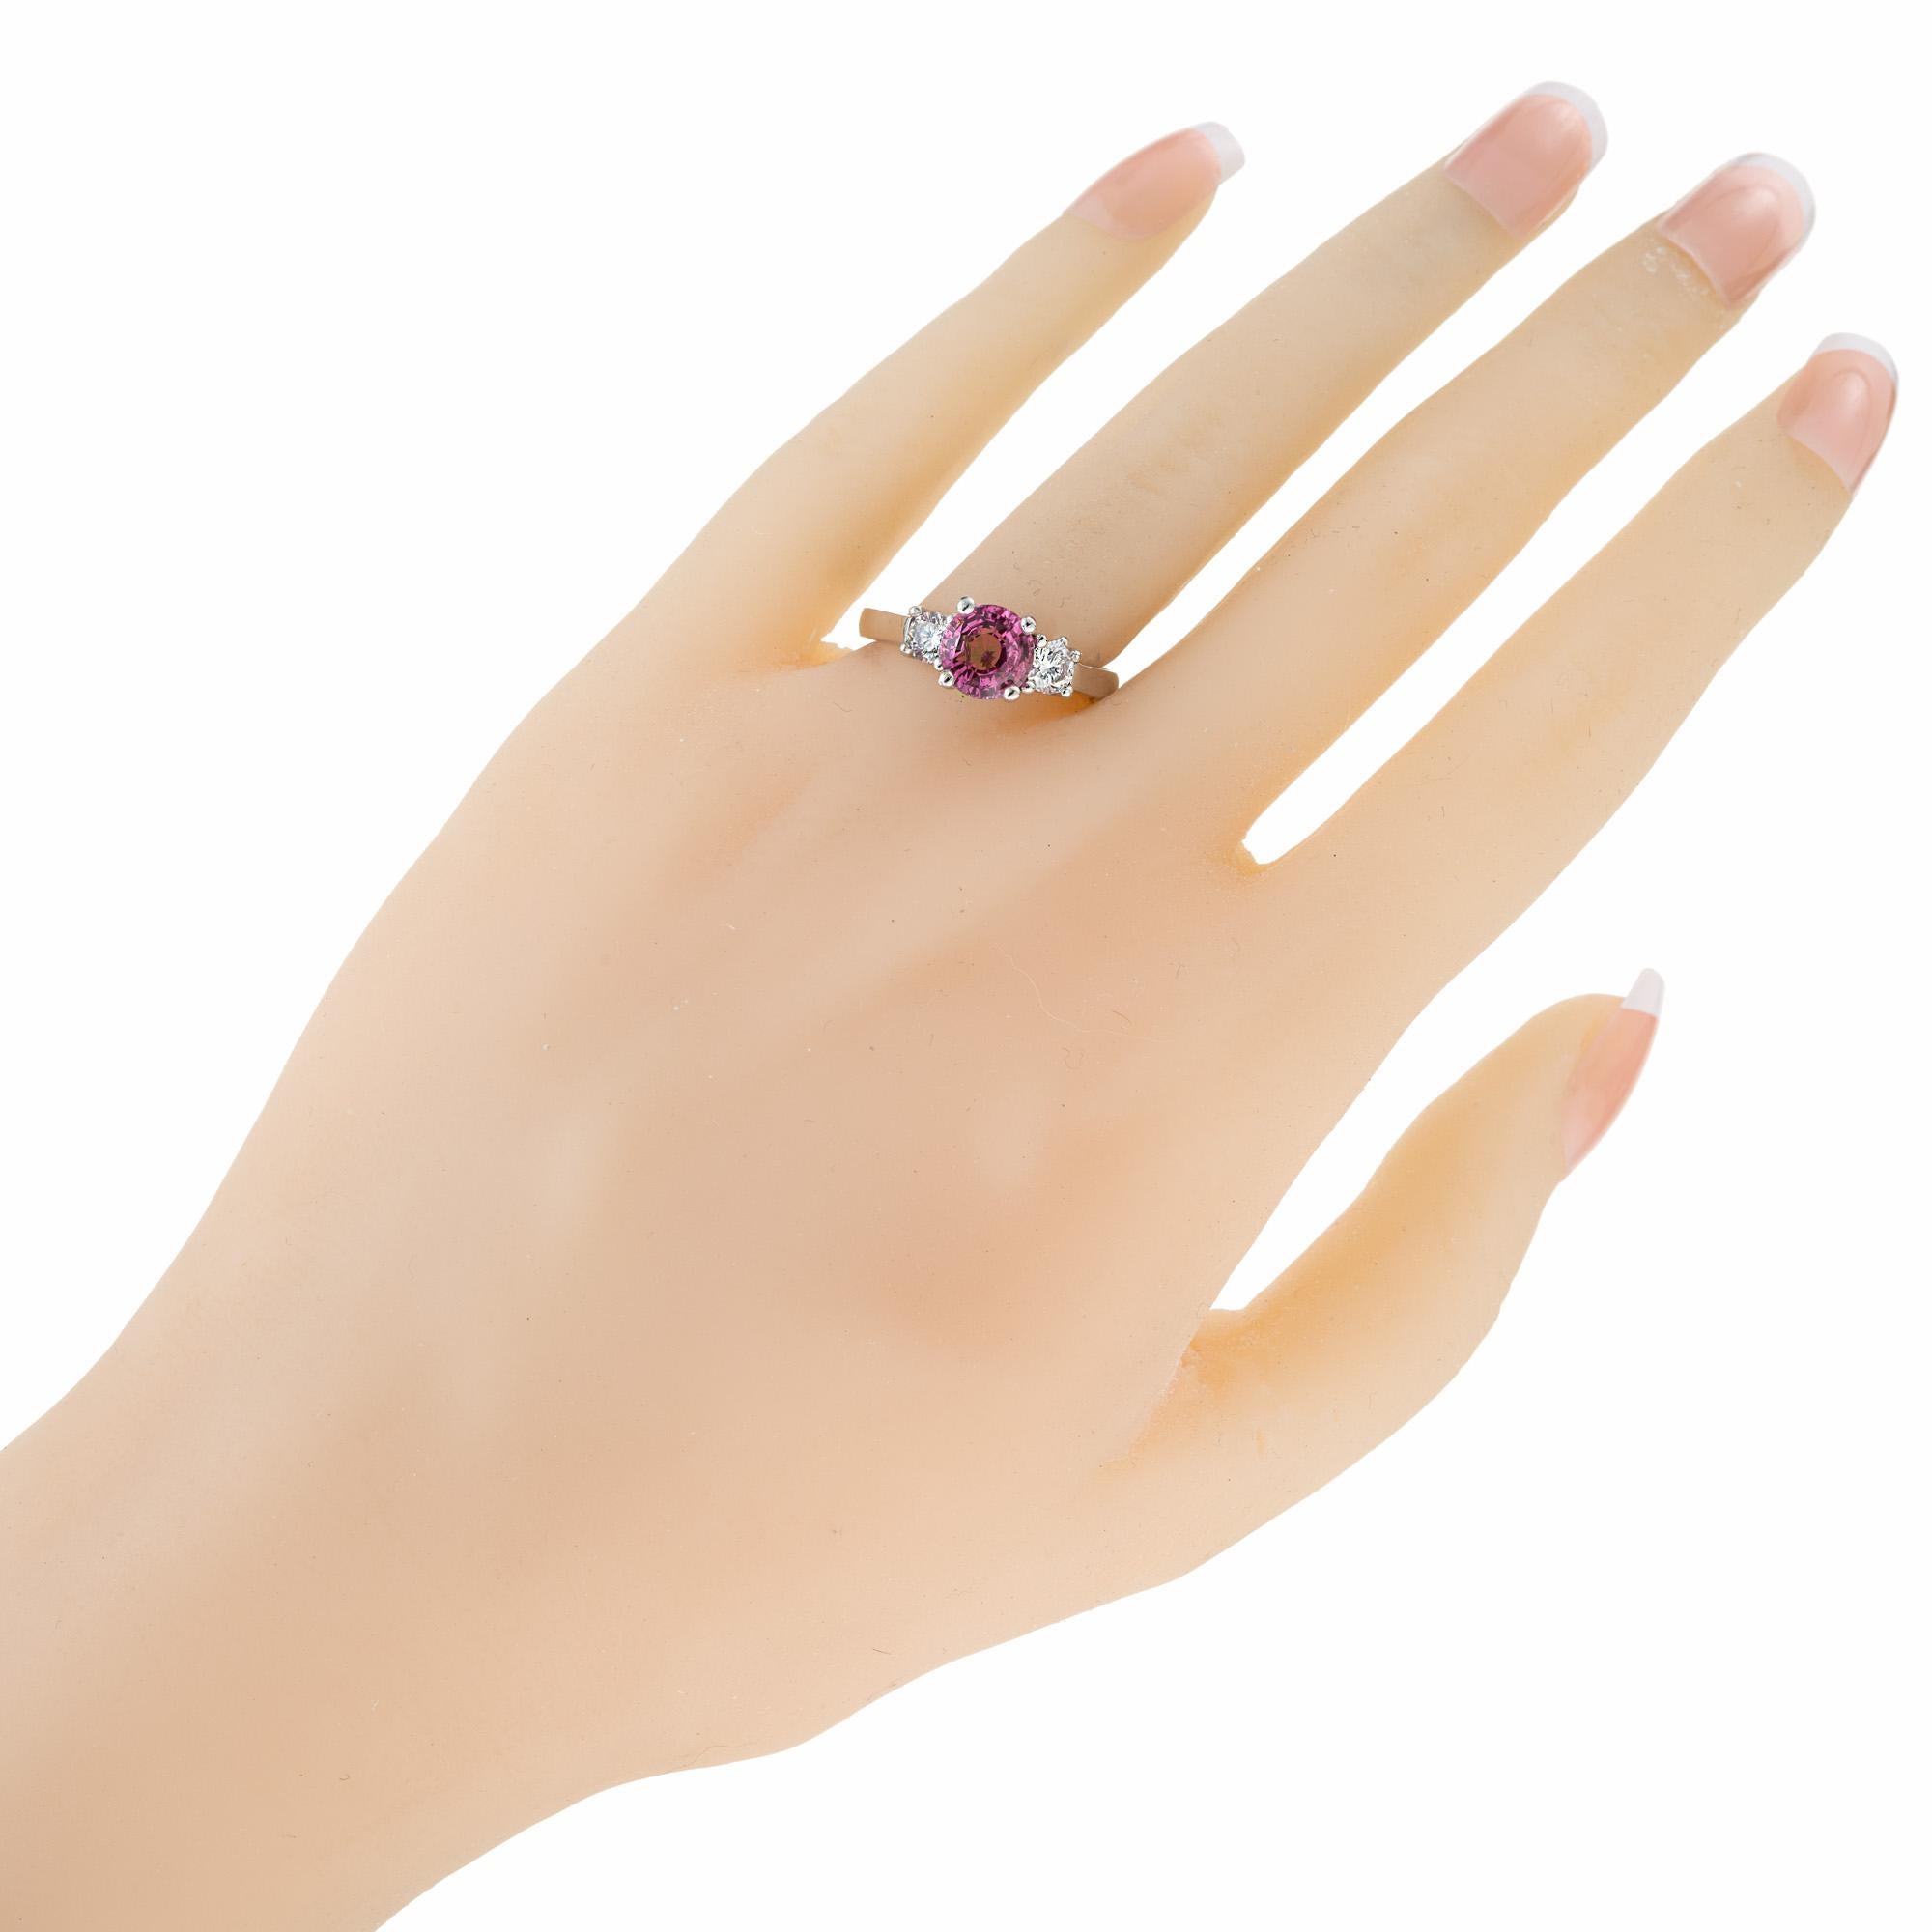 For Sale:  AGL Certified 1.79 Carat Pink Sapphire Diamond Platinum Engagement Ring 7